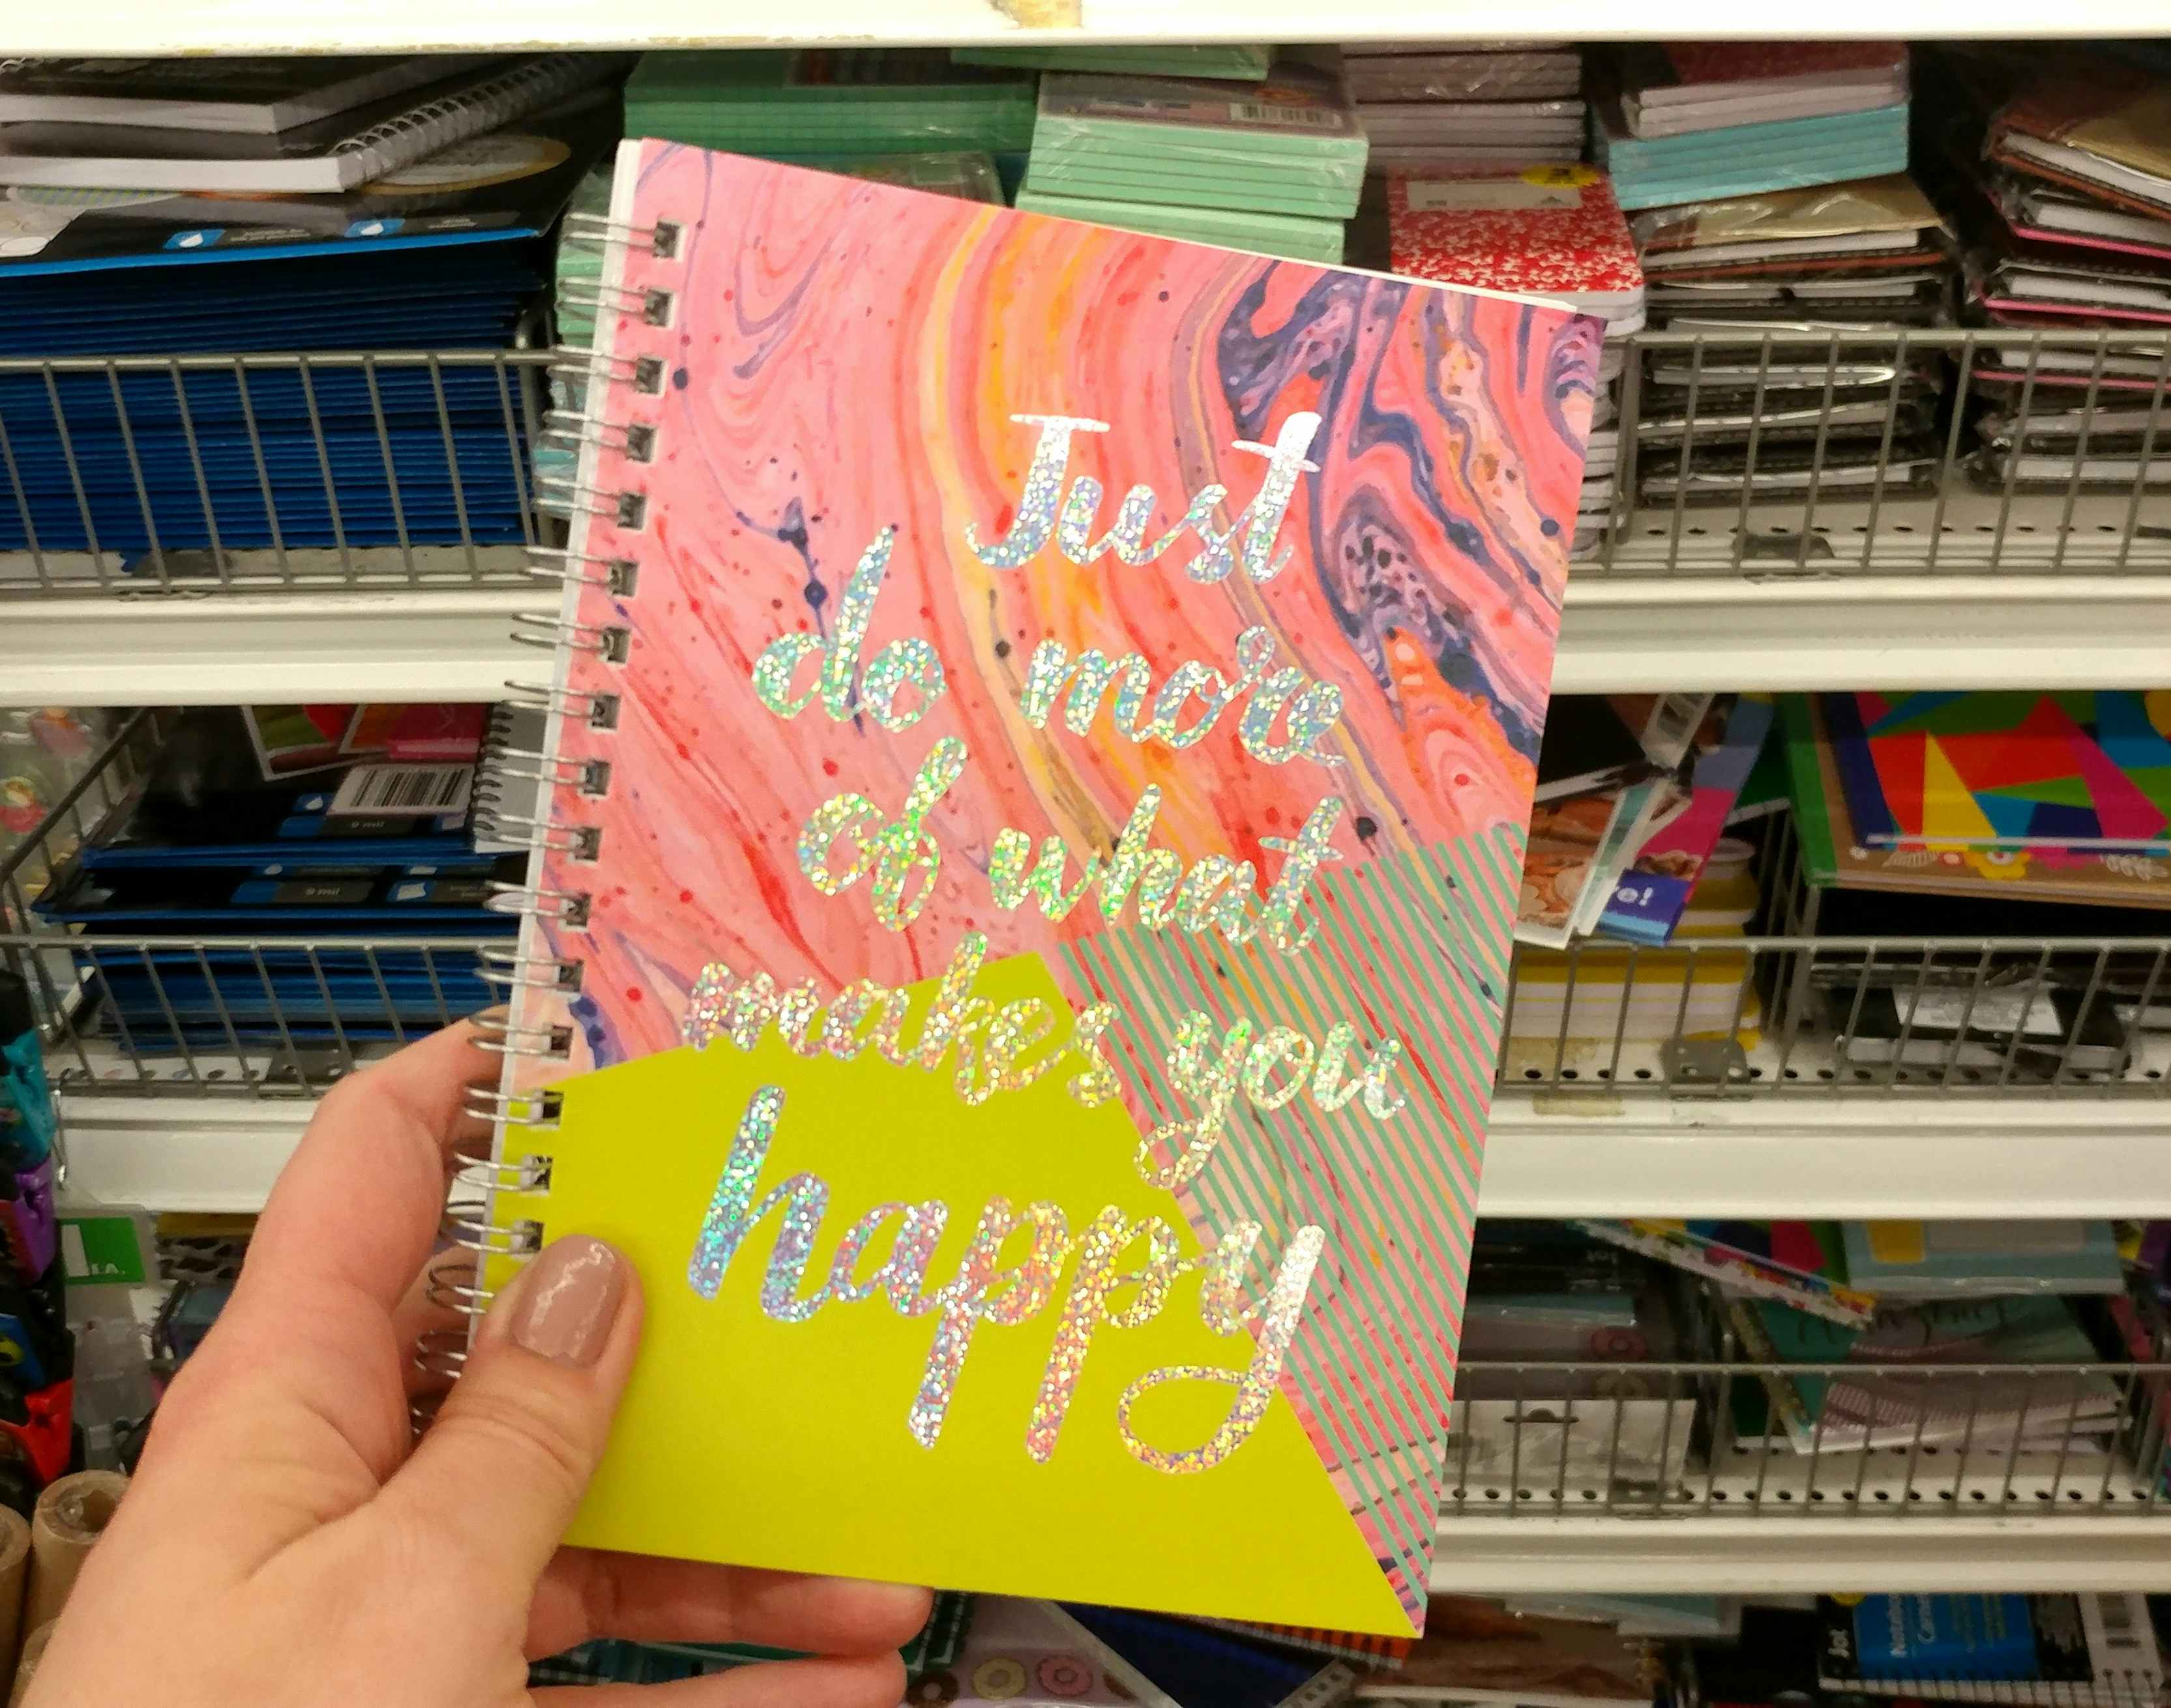 A person's hand holding a colorful spiral notebook in front of a shelf of more notebooks at Dollar Tree.